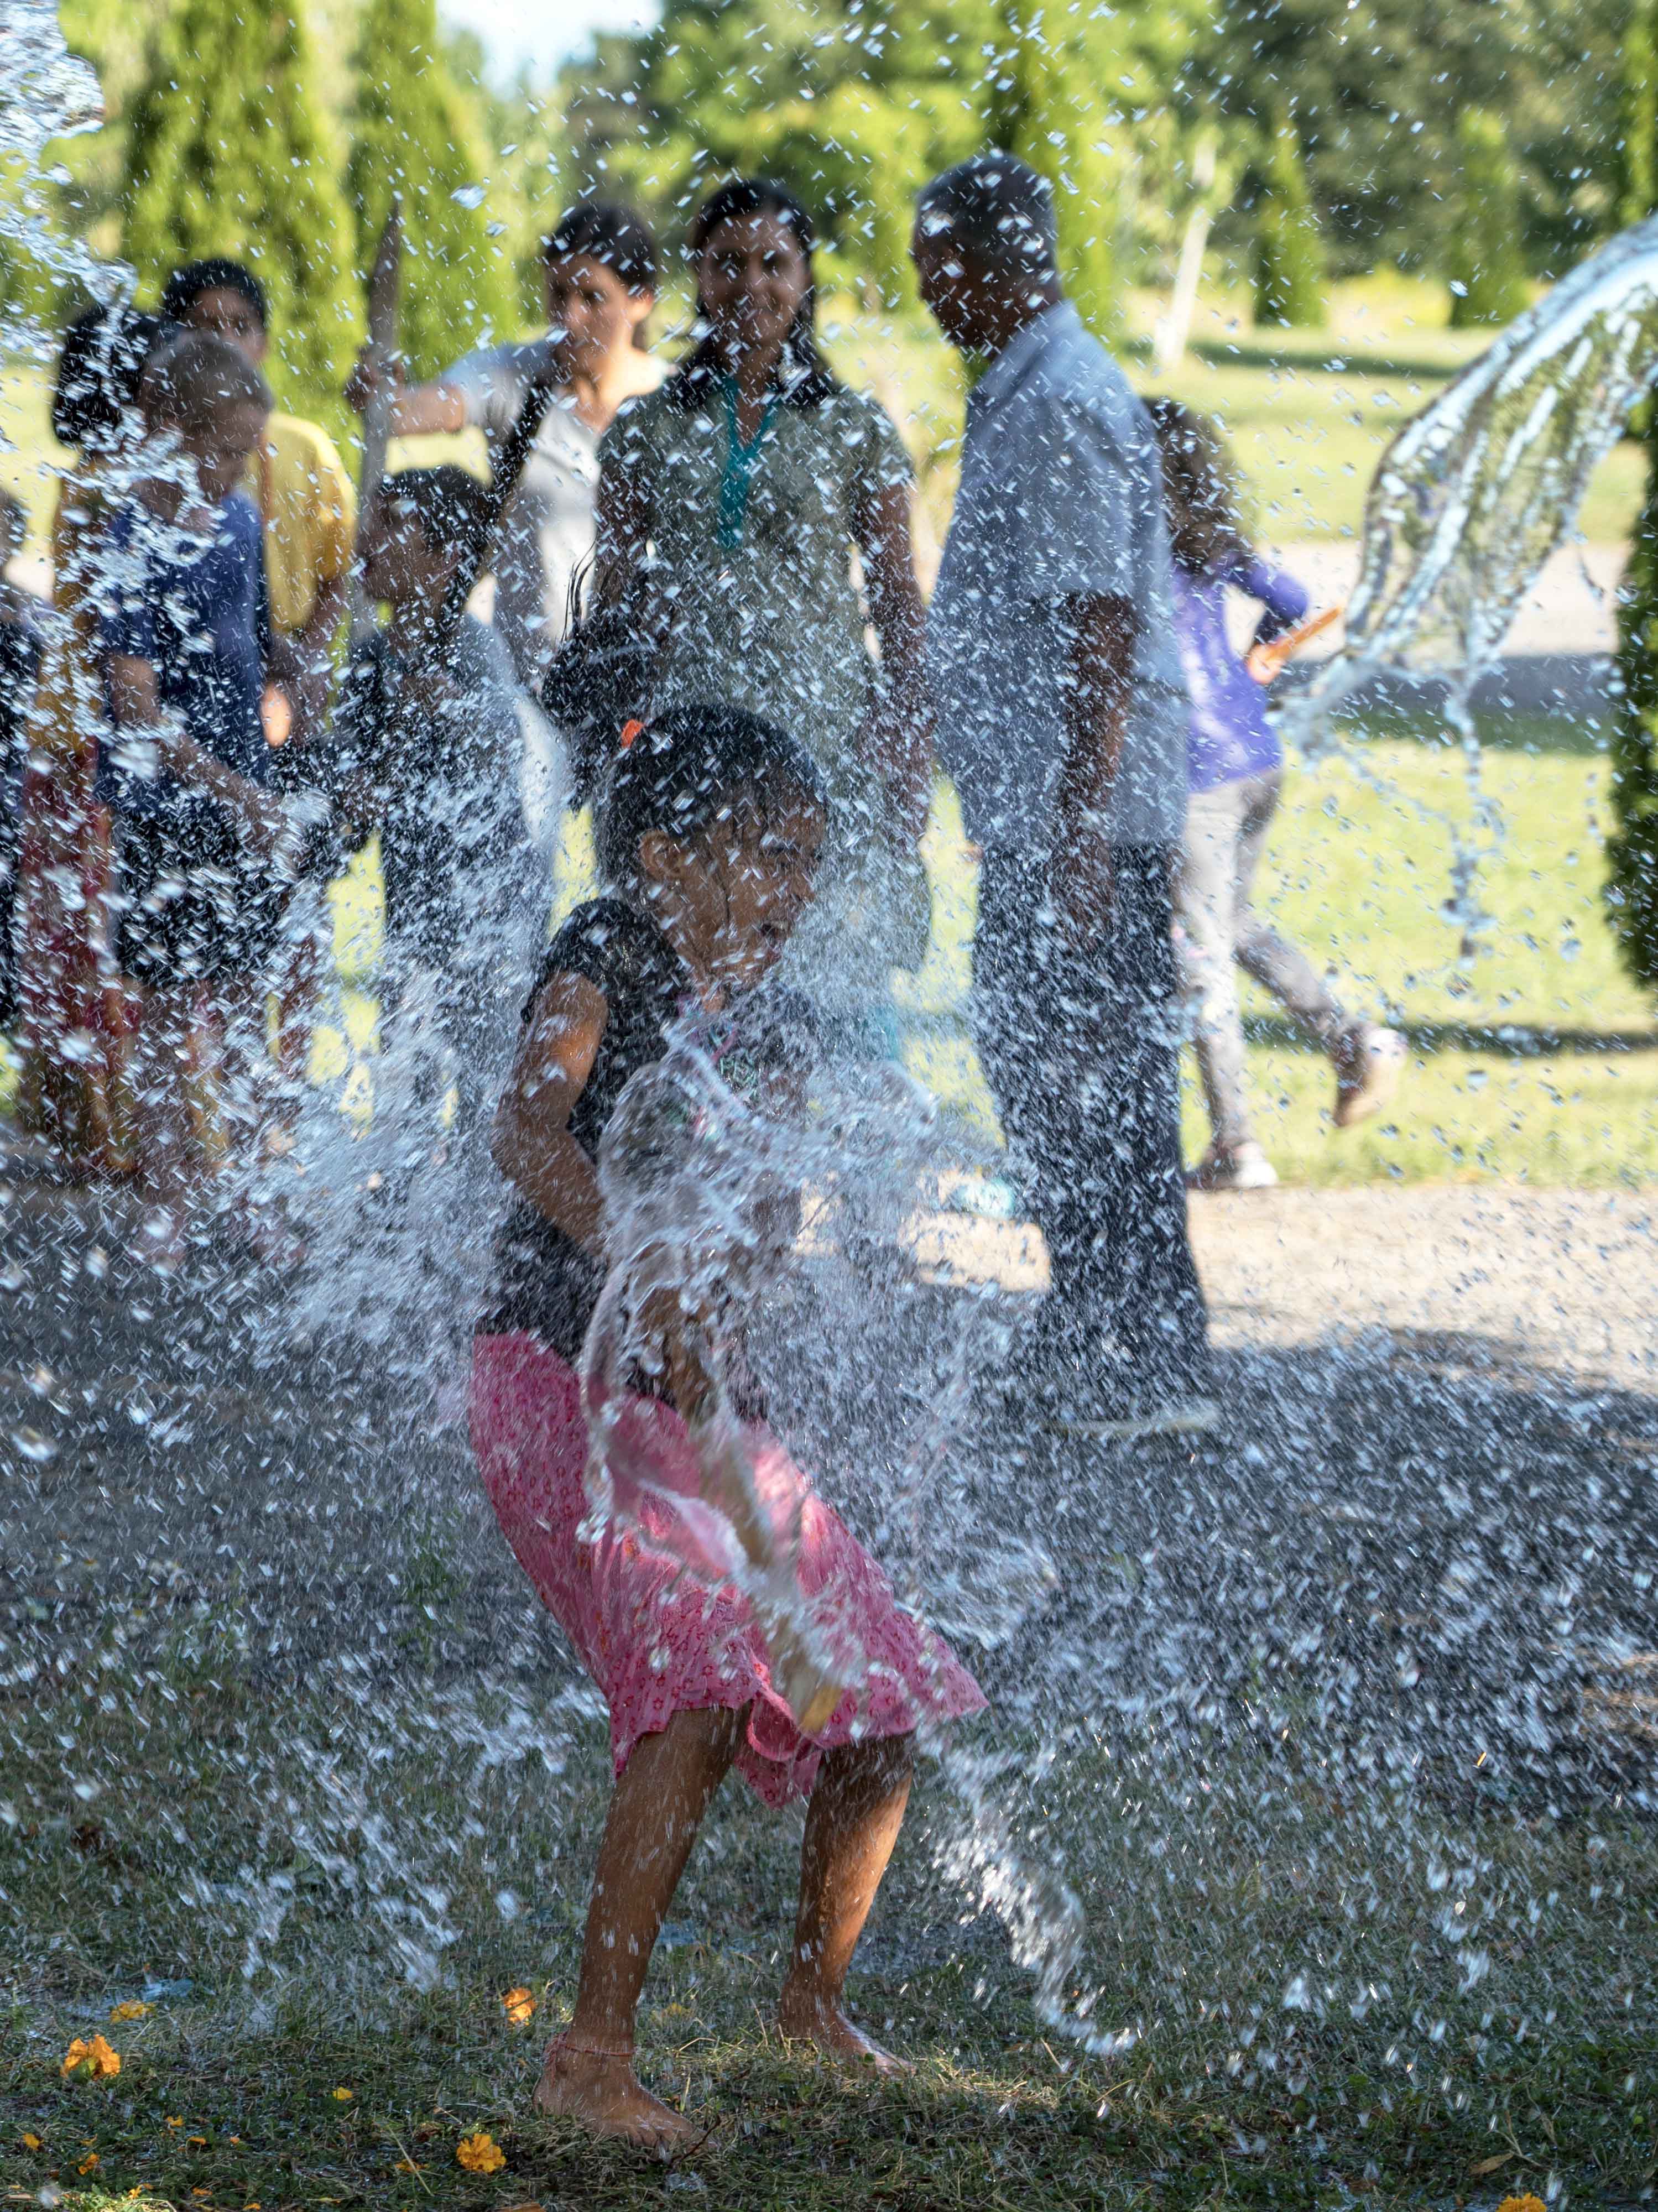 Girl getting splashed with water